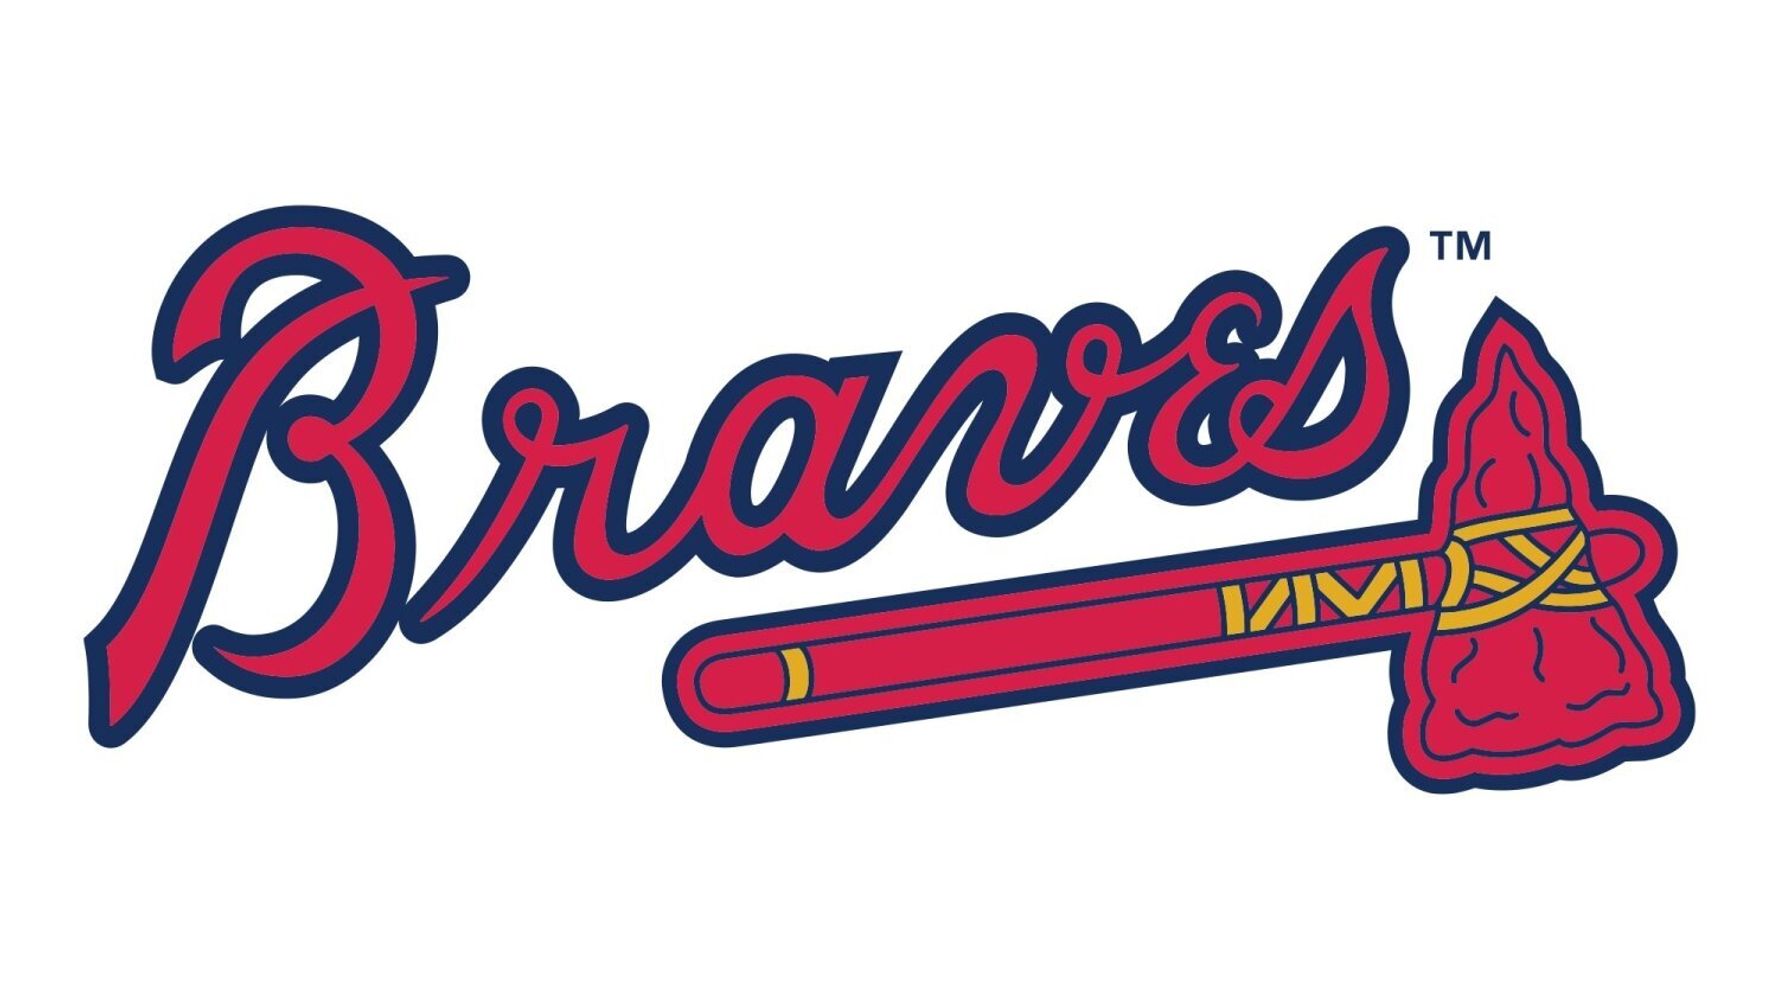 Atlanta Braves Will Reportedly Keep Name, Re-Evaluate Tomahawk Chop